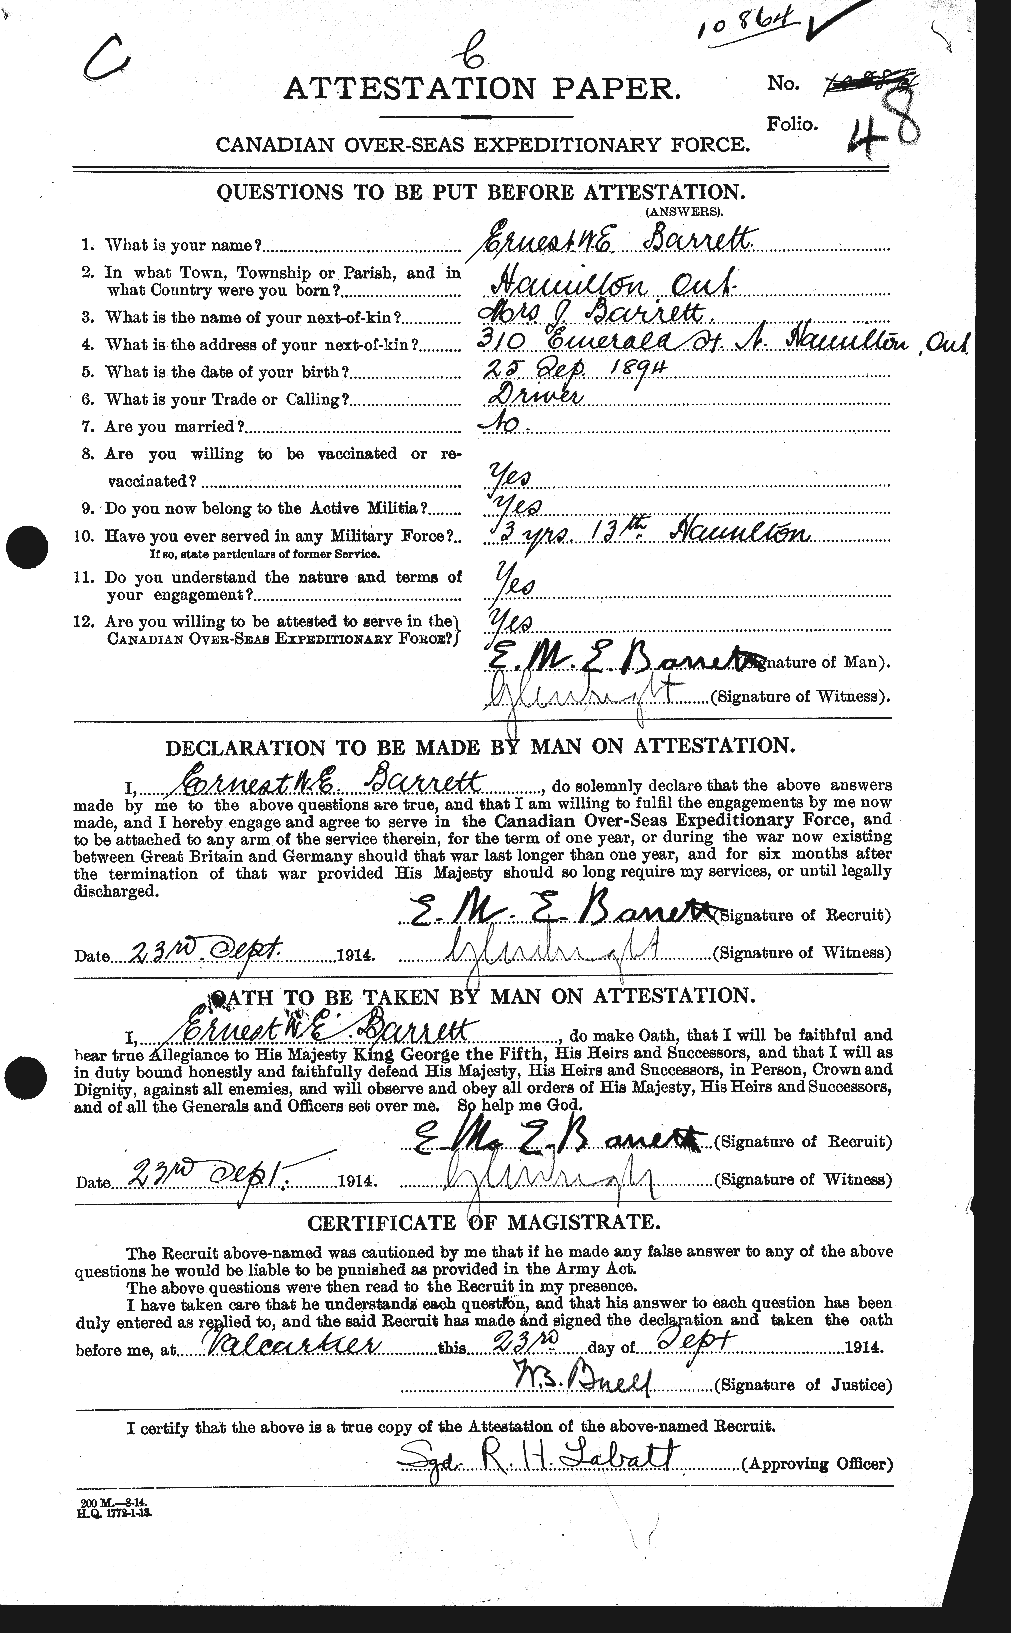 Personnel Records of the First World War - CEF 220345a